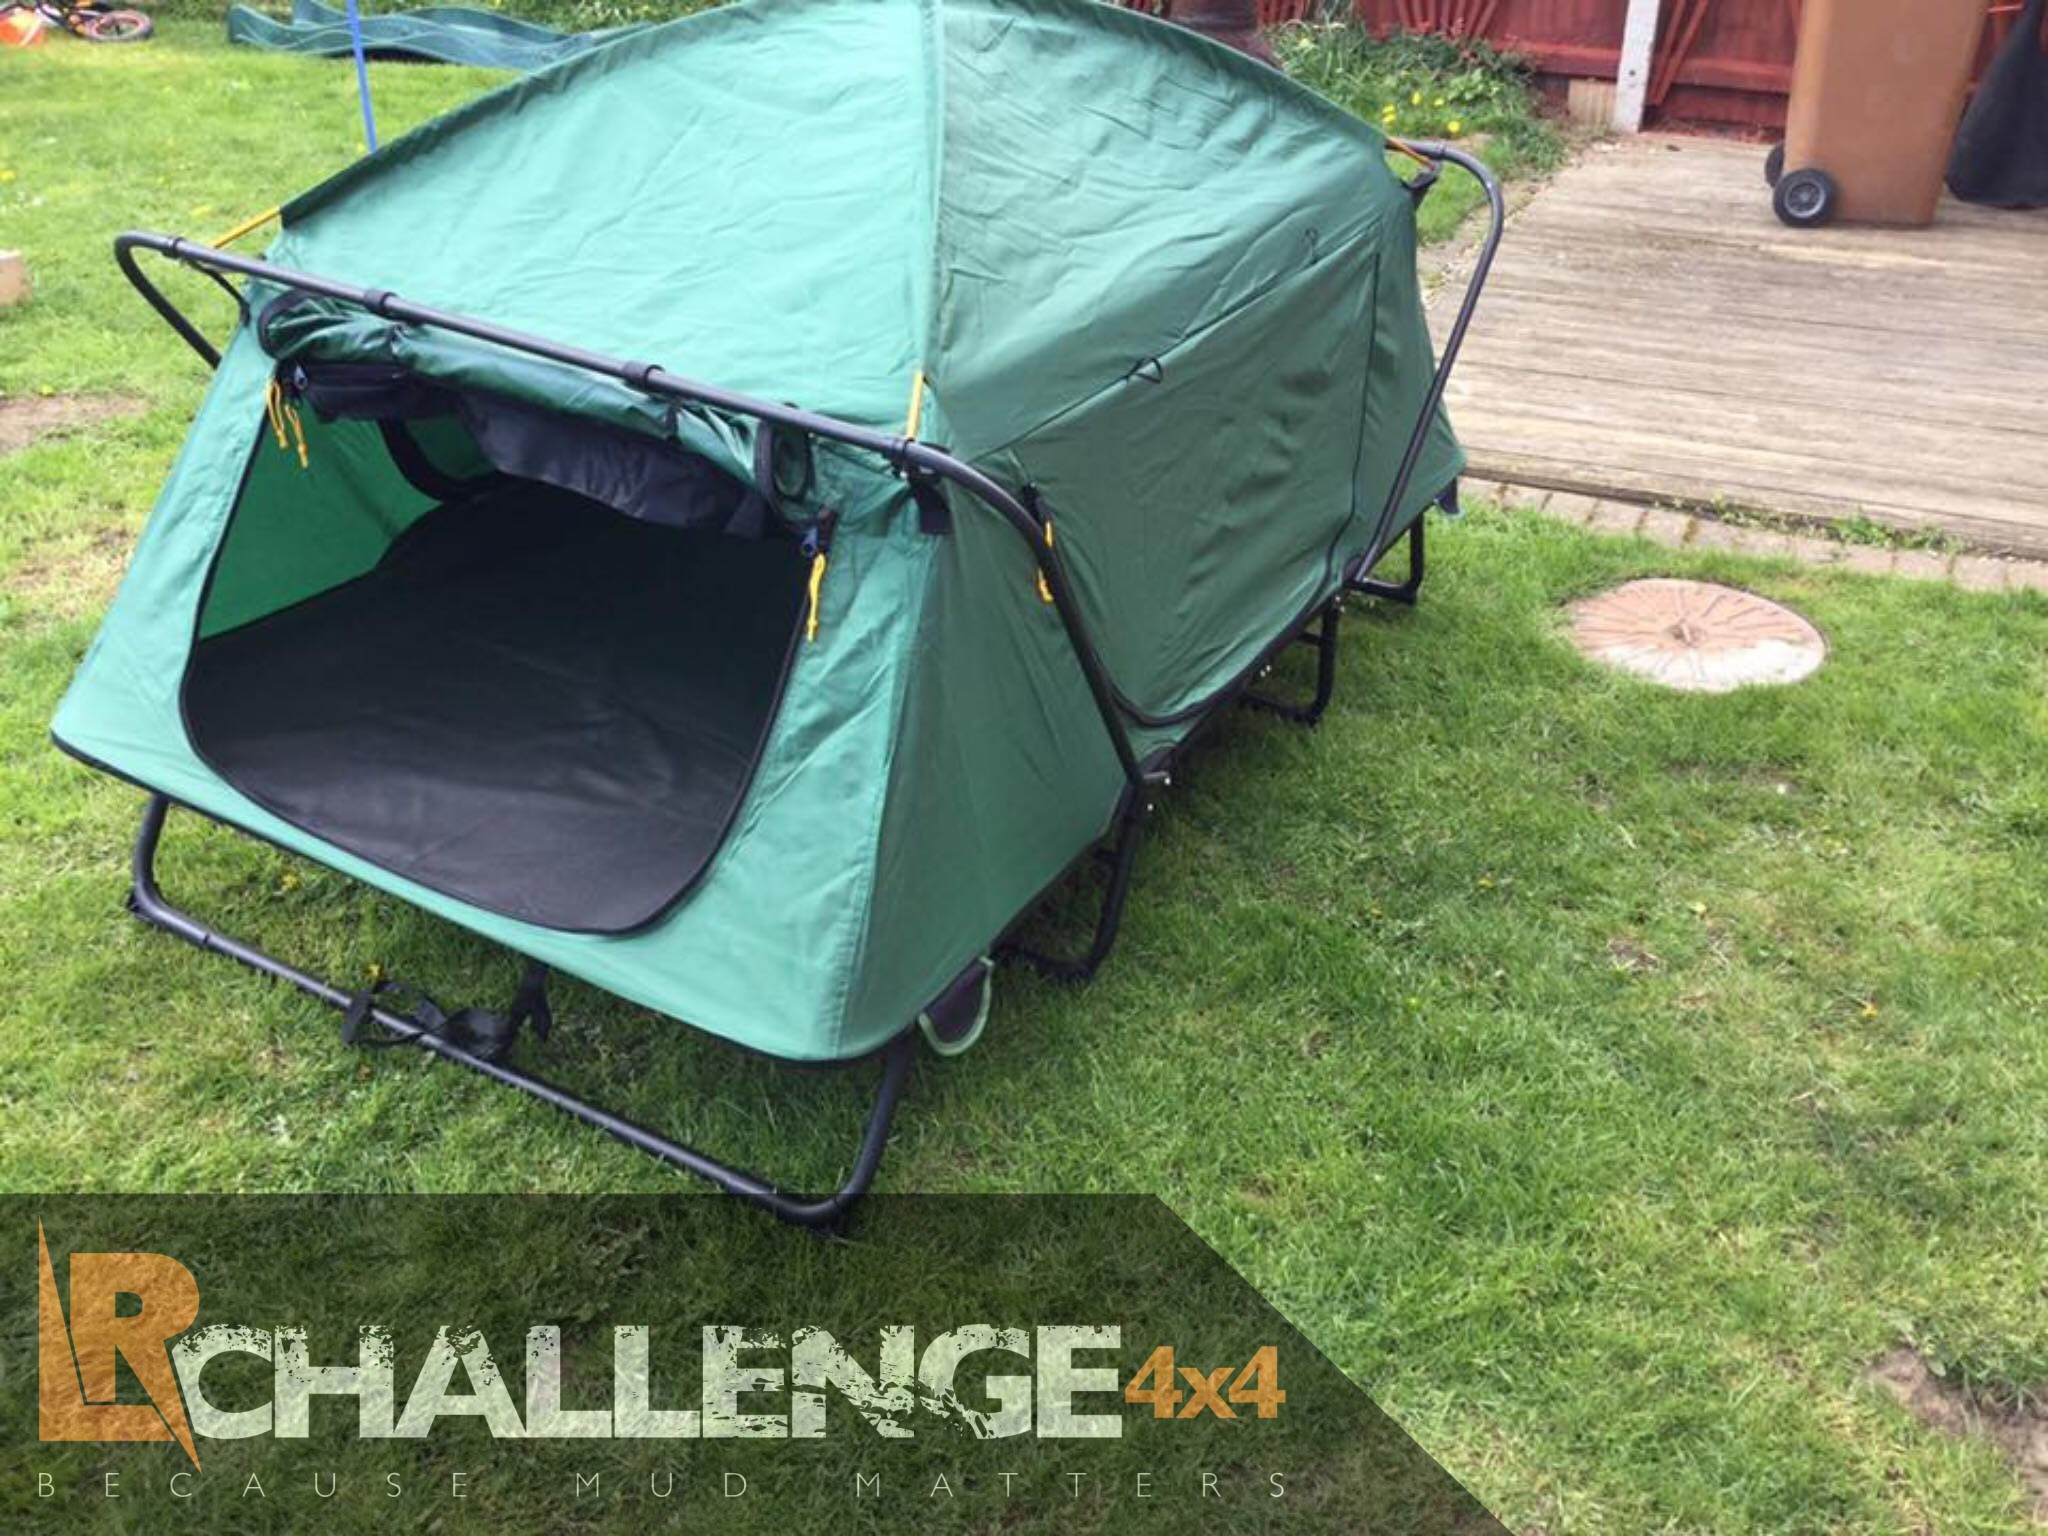 Waterproof, strong and sturdy Off floor camping Tent heavy duty fishing etc LR Challenge